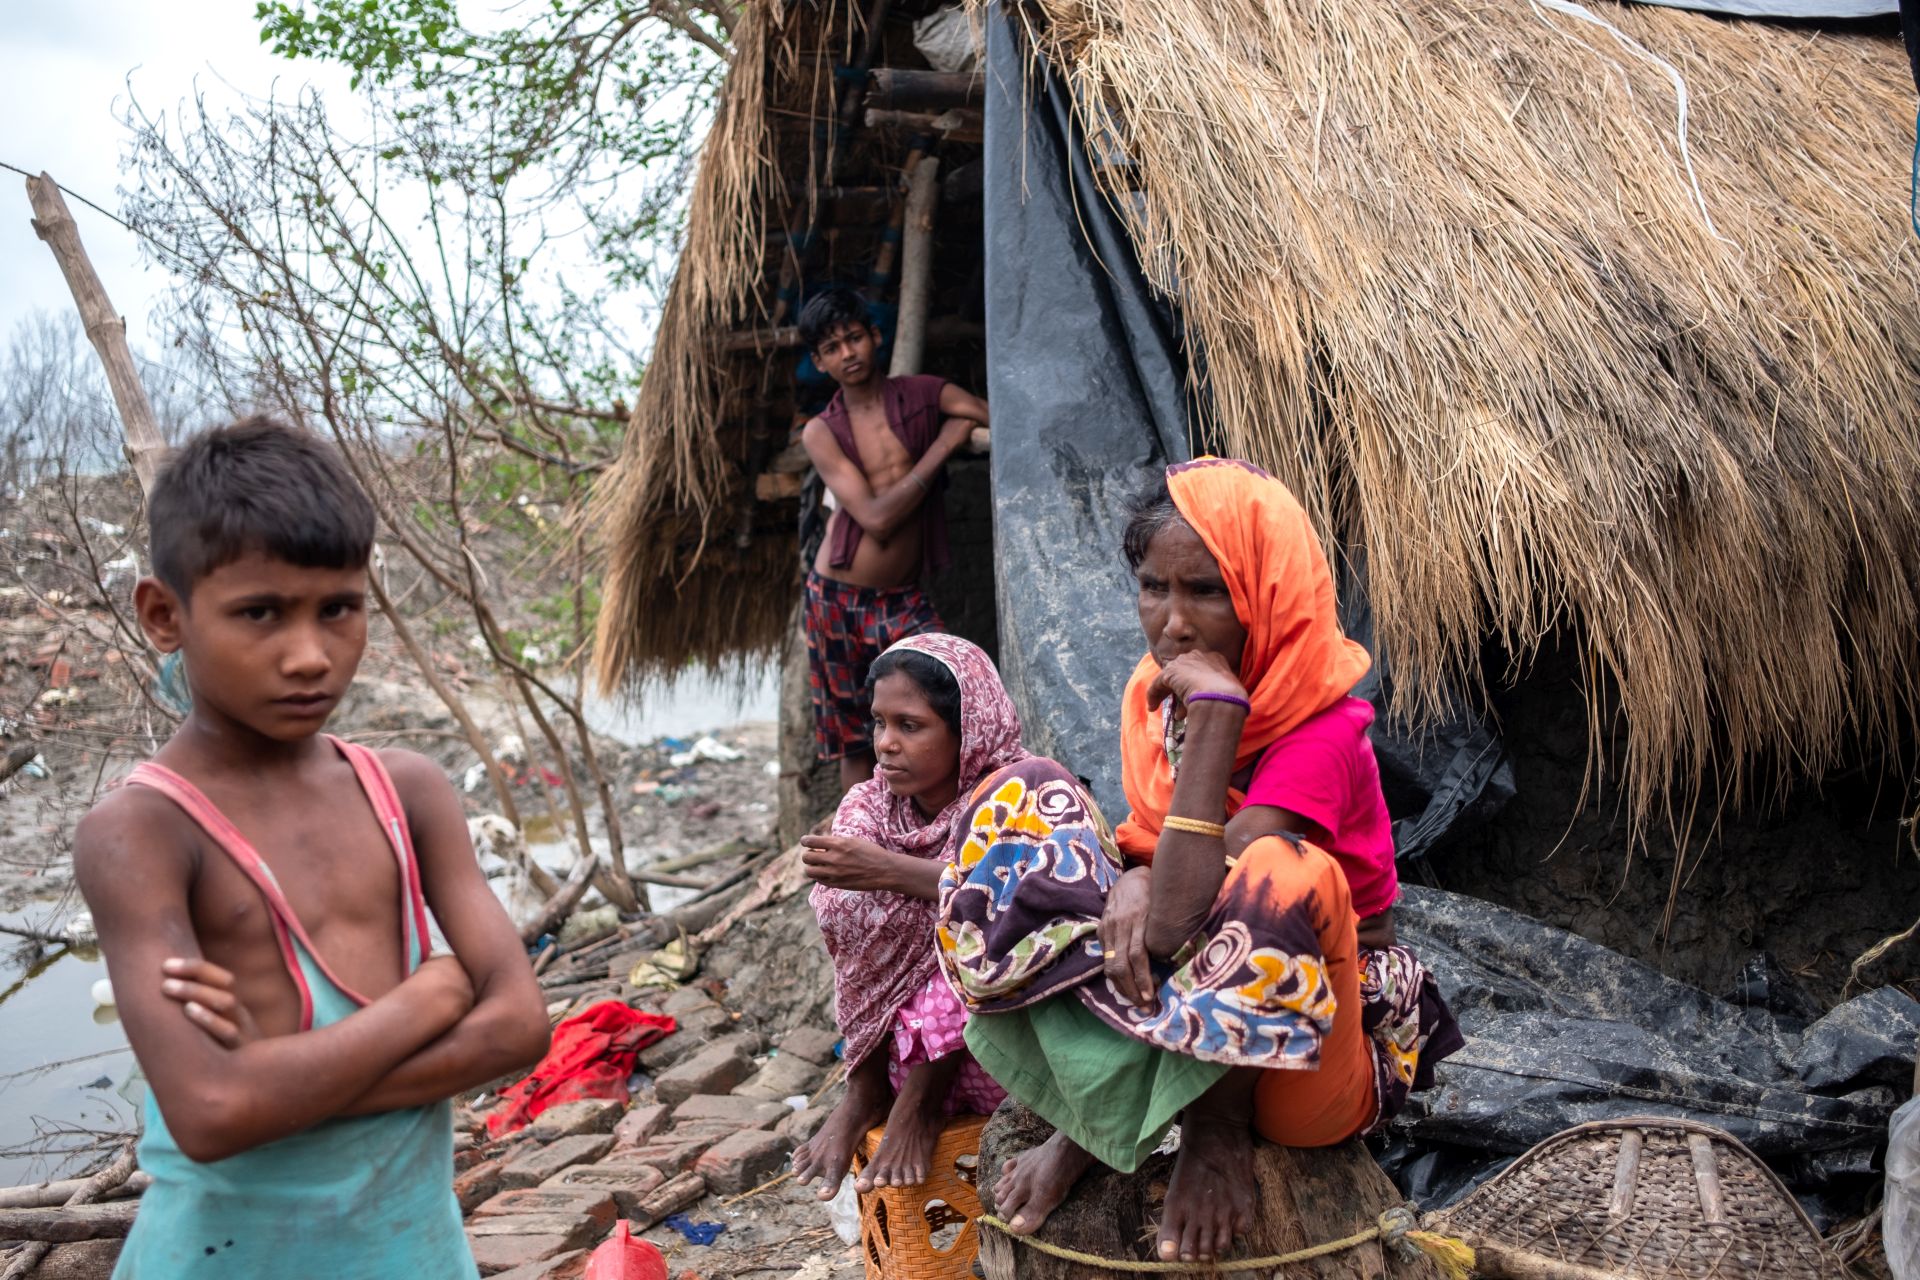 In the meanwhile, those whose houses have been completely destroyed are living in shacks. This family is living in a shack near the Karjankrik embankment as their home was destroyed by Amphan. (Image: WaterAid/ Subhrajit Sen)